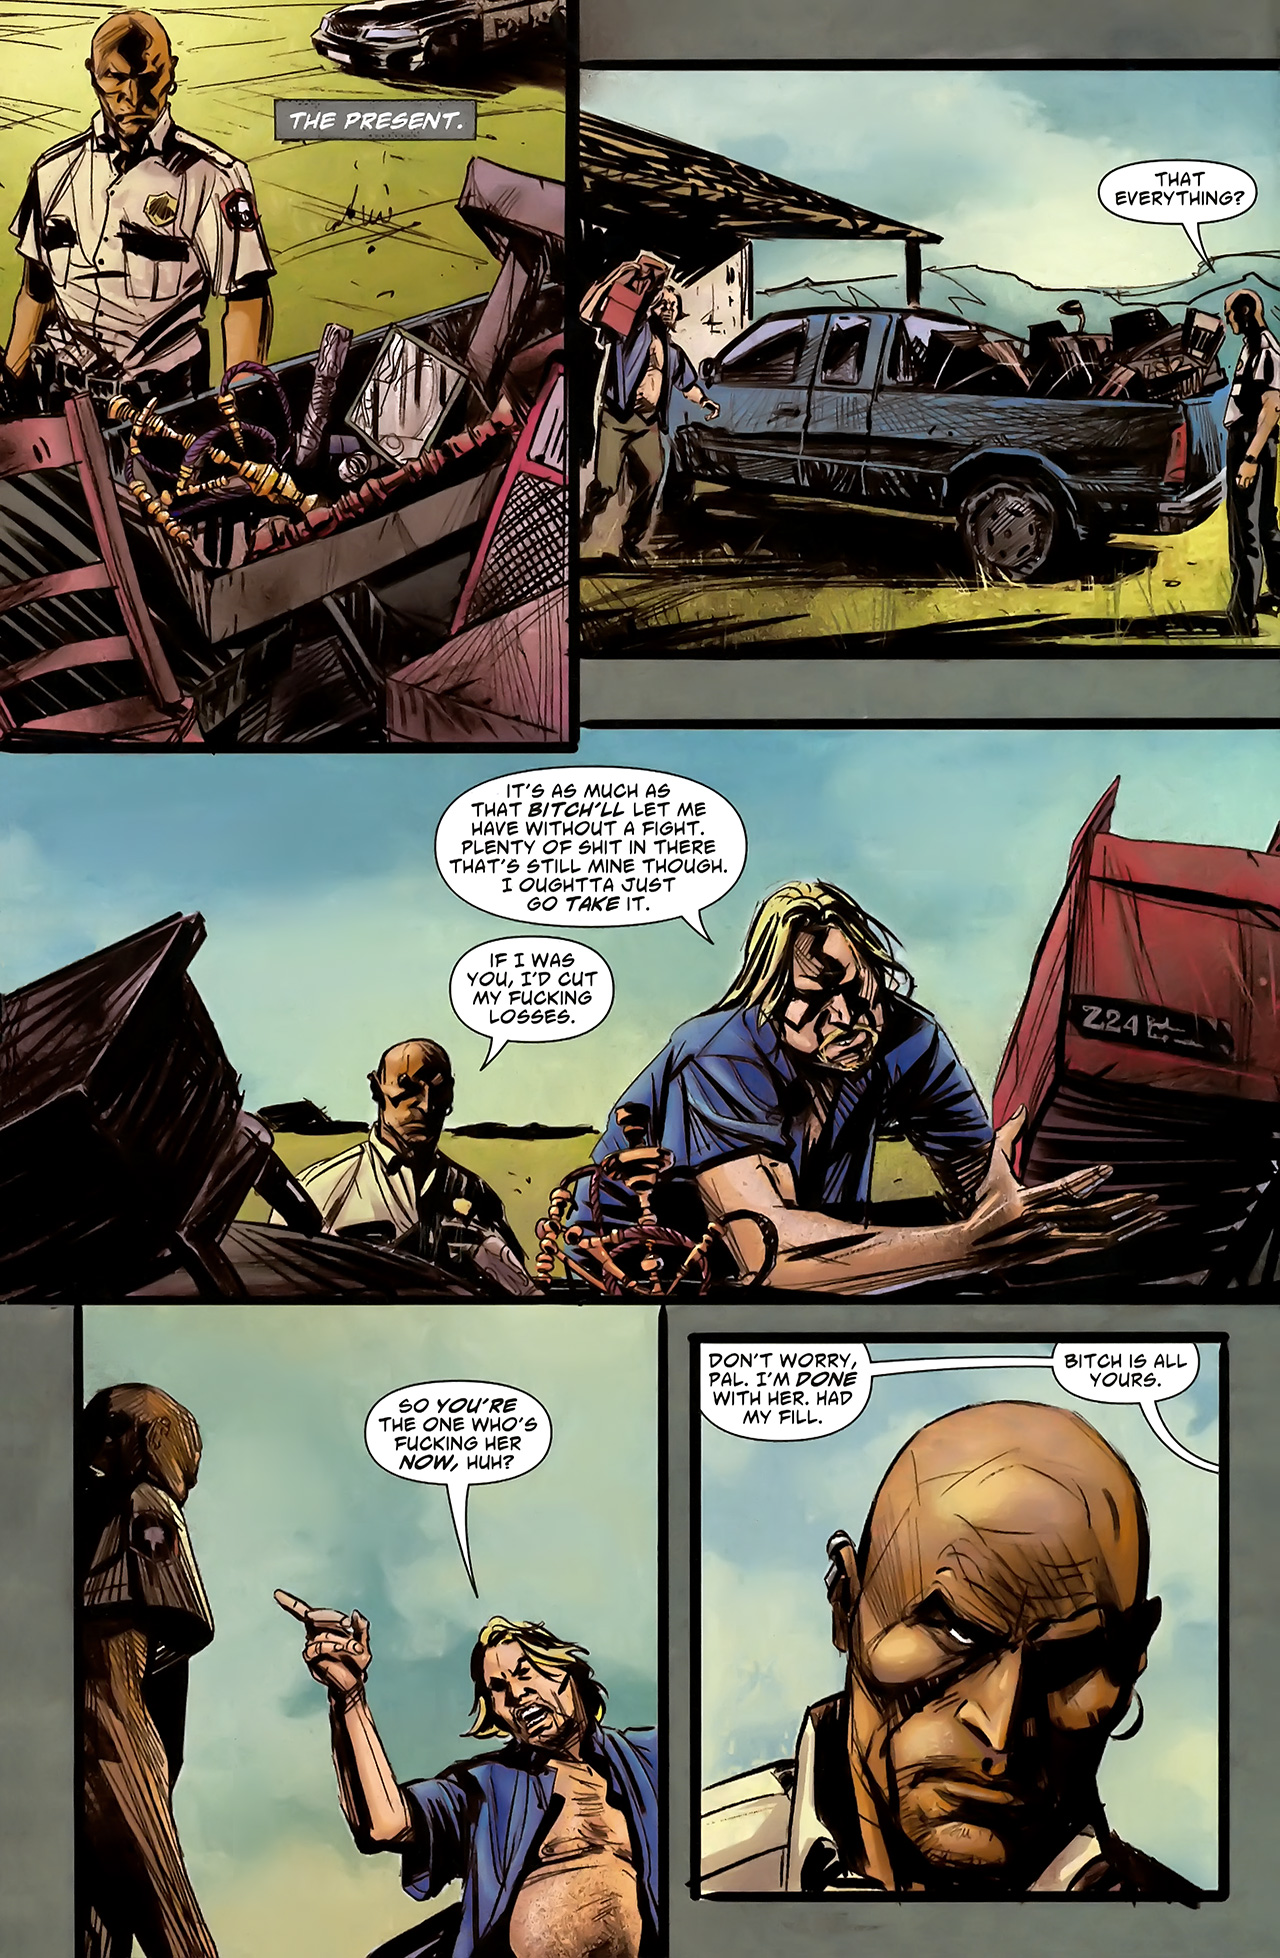 Scalped #19 - The Boudoir Stomp, Part One